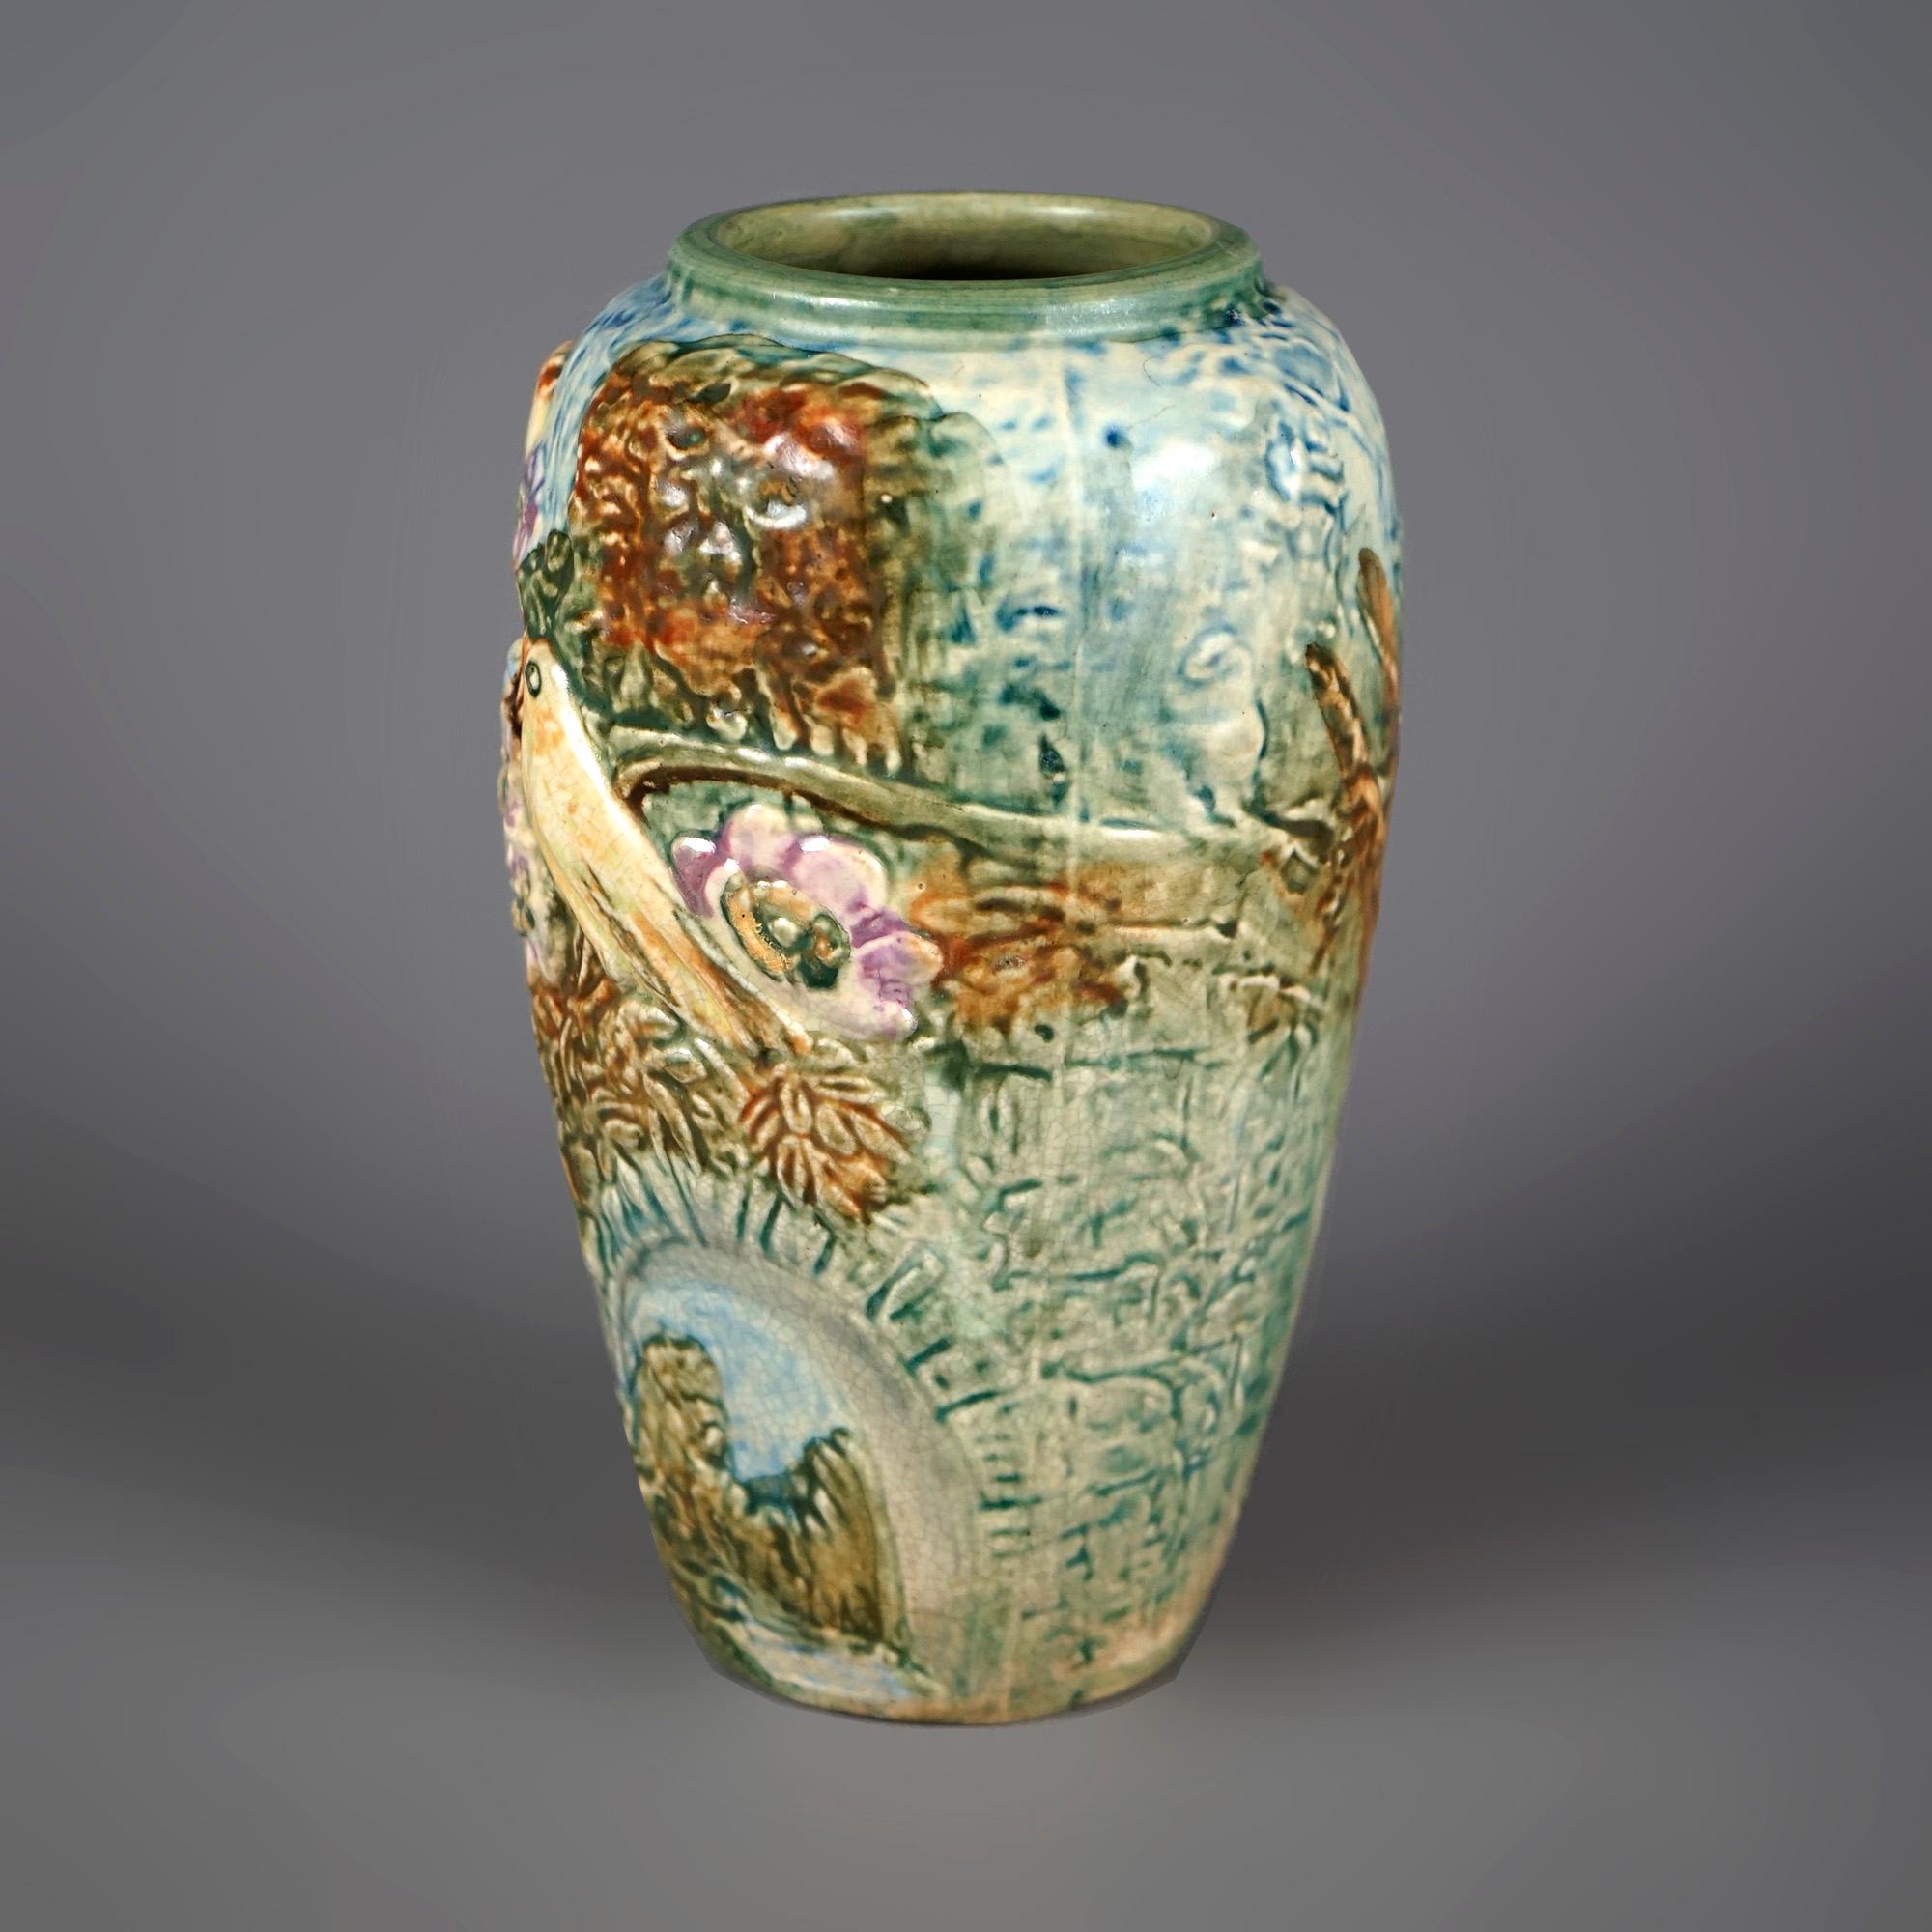 An antique Weller Glendale vase offers art pottery construction with high relief design of woodland setting with gold finches in a nest, c1920

Measures- 8''H x 4.5''W x 4.5''D